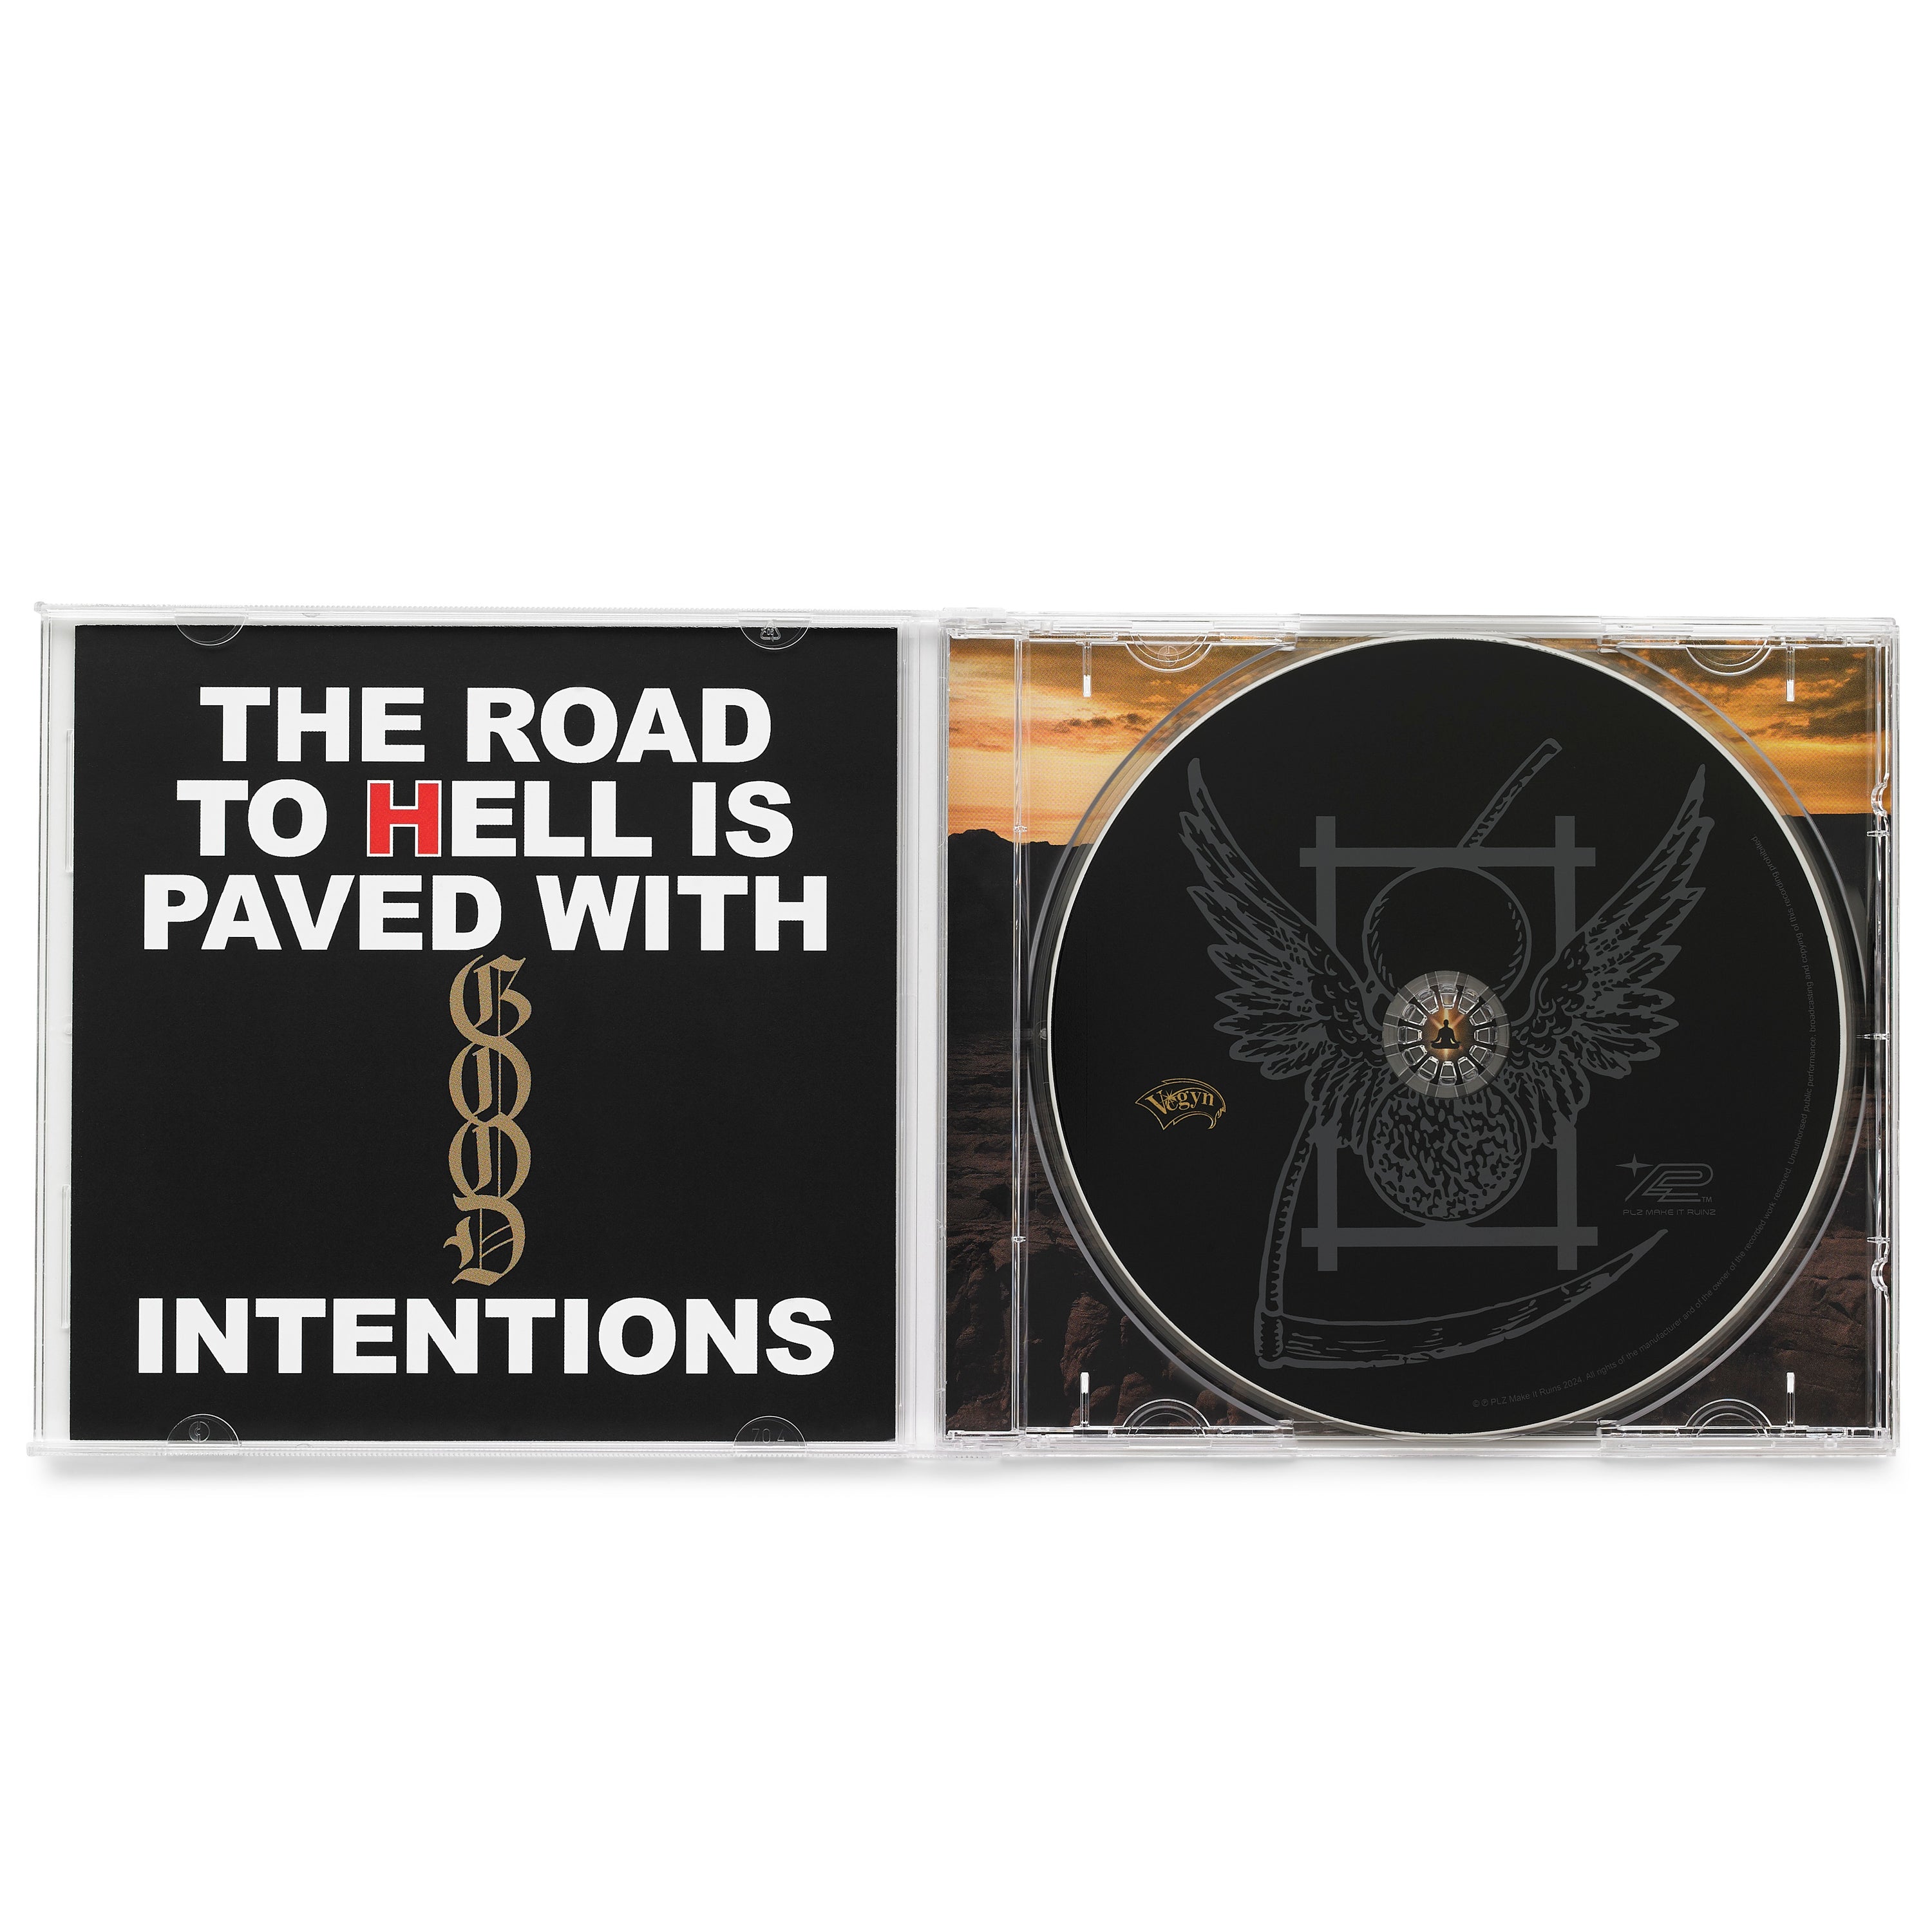 Vegyn - The Road To Hell Is Paved With Good Intentions - CD